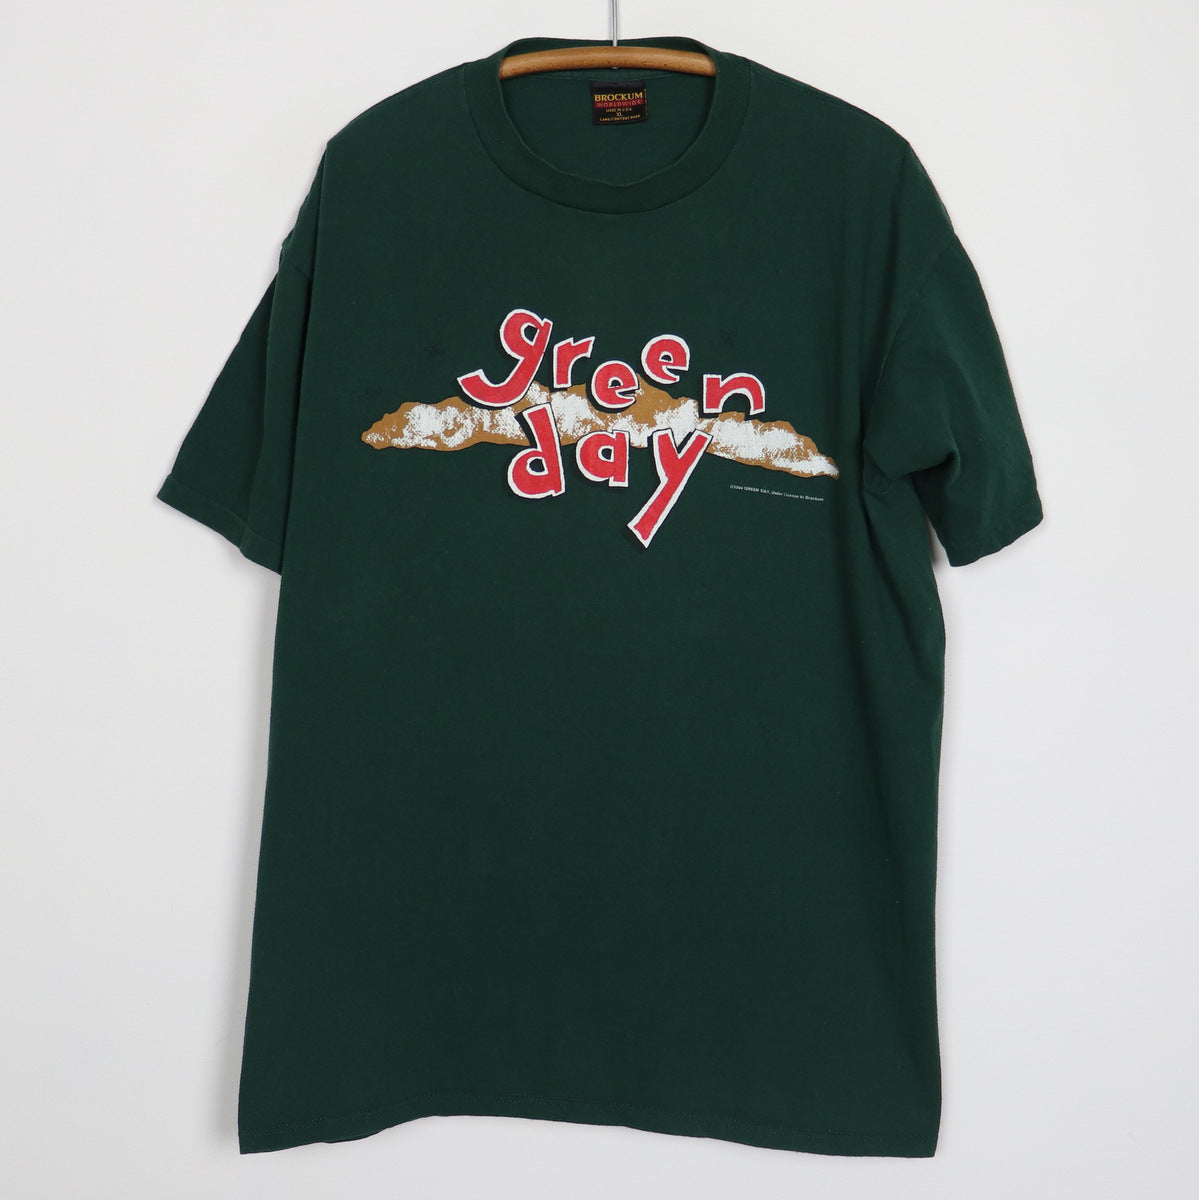 greenday Dookie Tour 1994 tシャツ - トップス